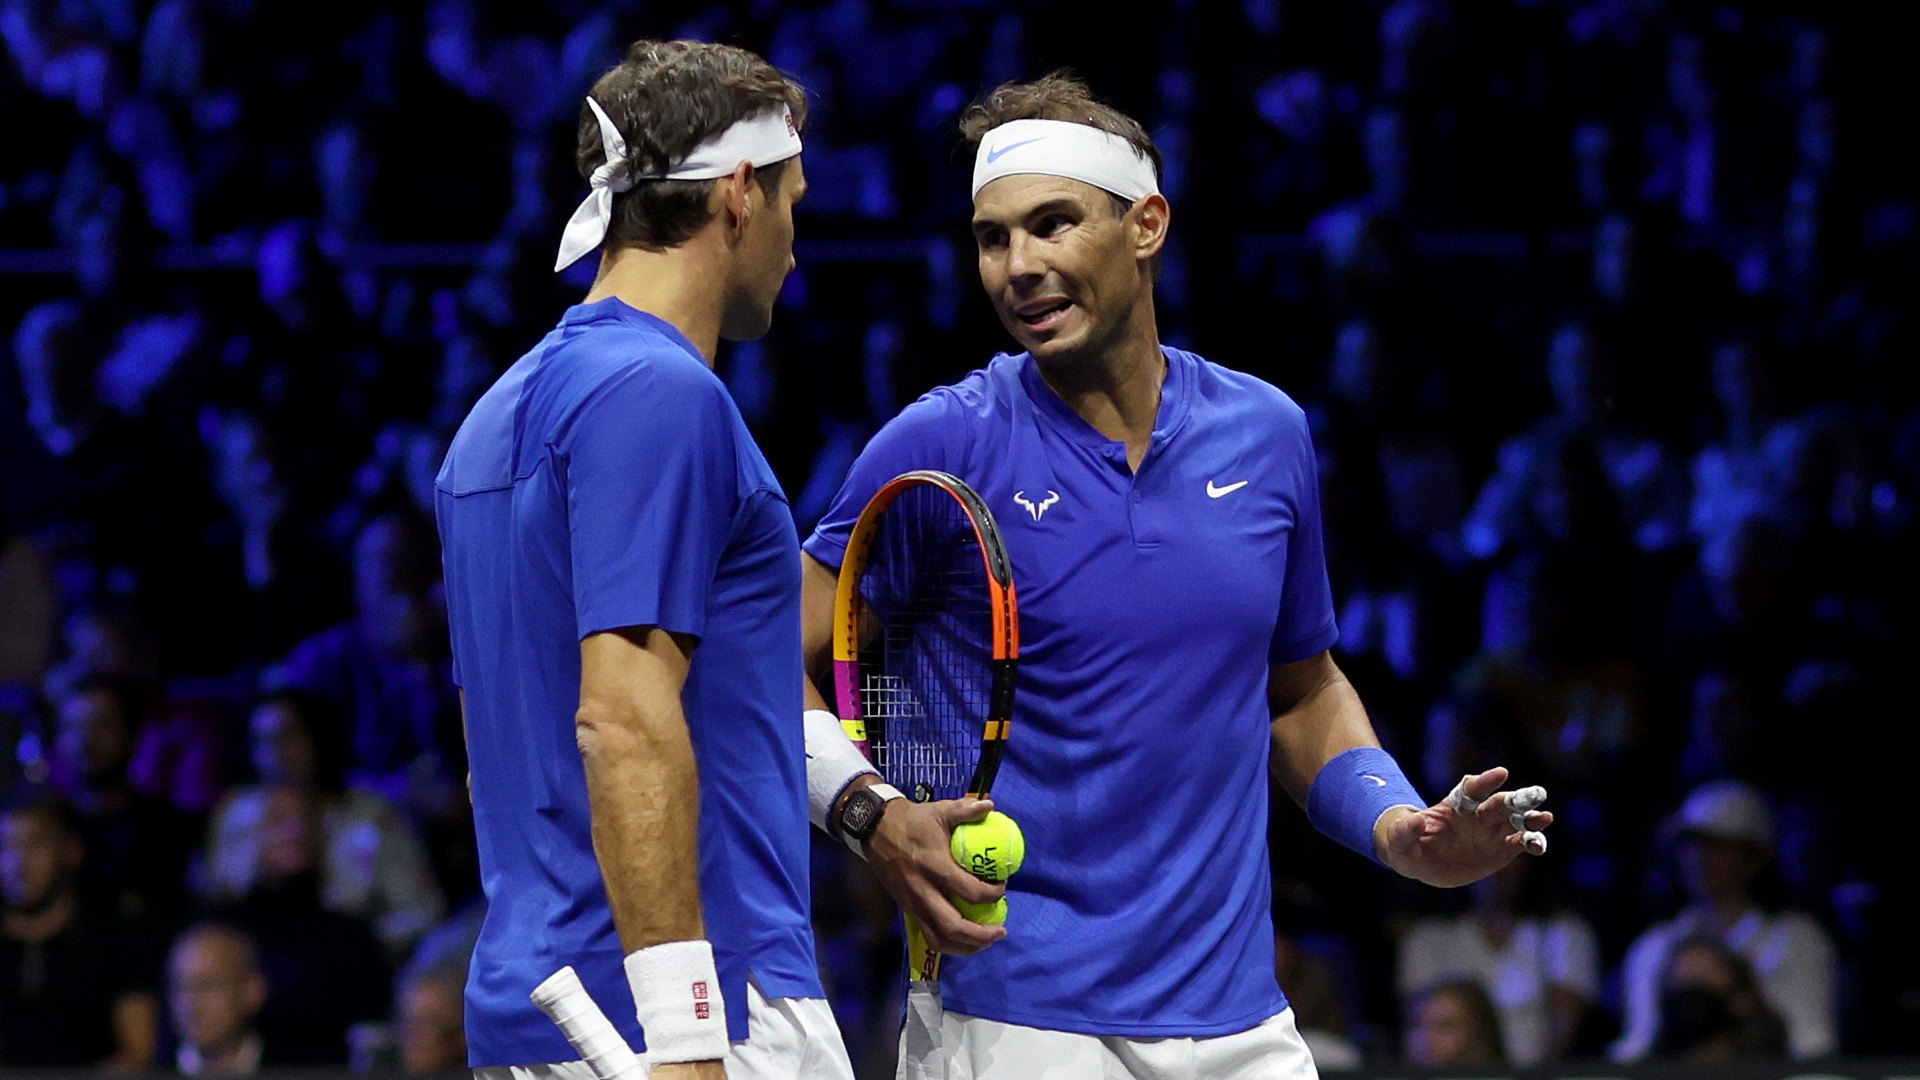 Nadal withdraws from Laver Cup beIN SPORTS